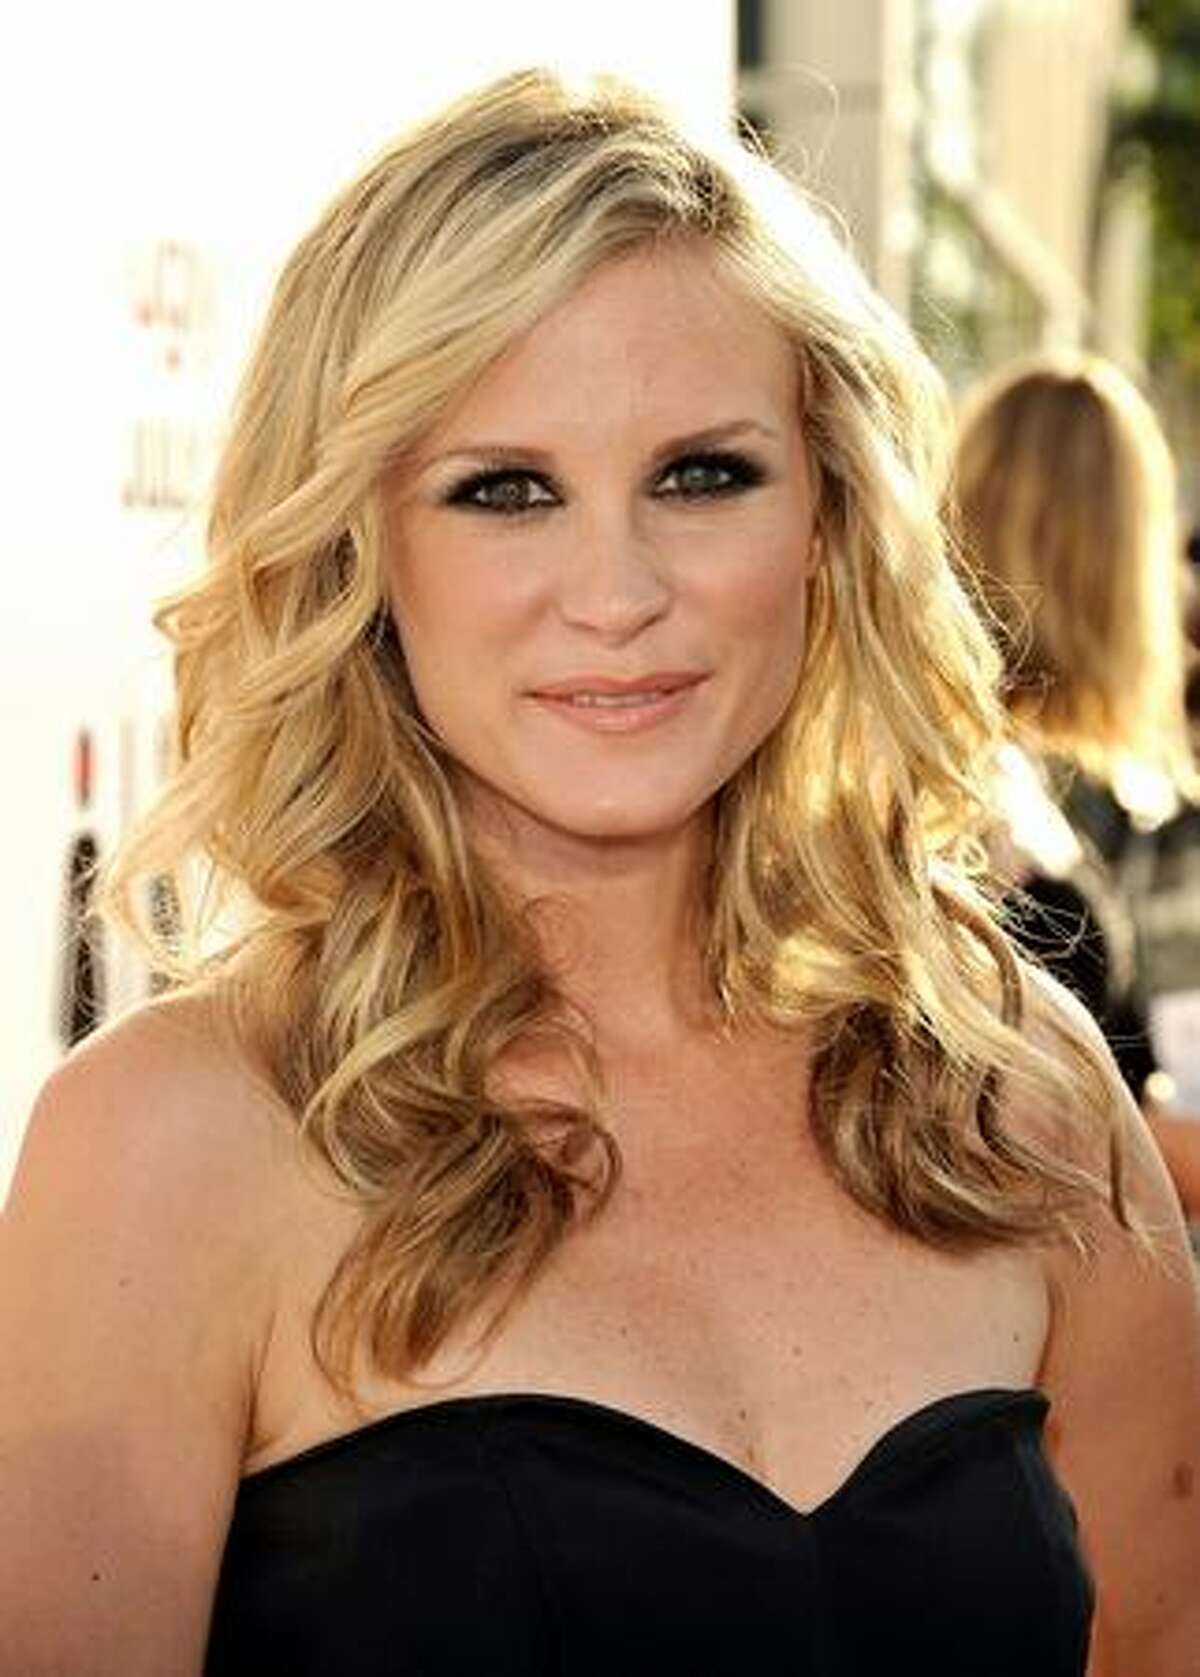 Actress Bonnie Somerville arrives at the premiere of Columbia Pictures' "The Ugly Truth" held at Pacific's Cinerama Dome in Hollywood, California.